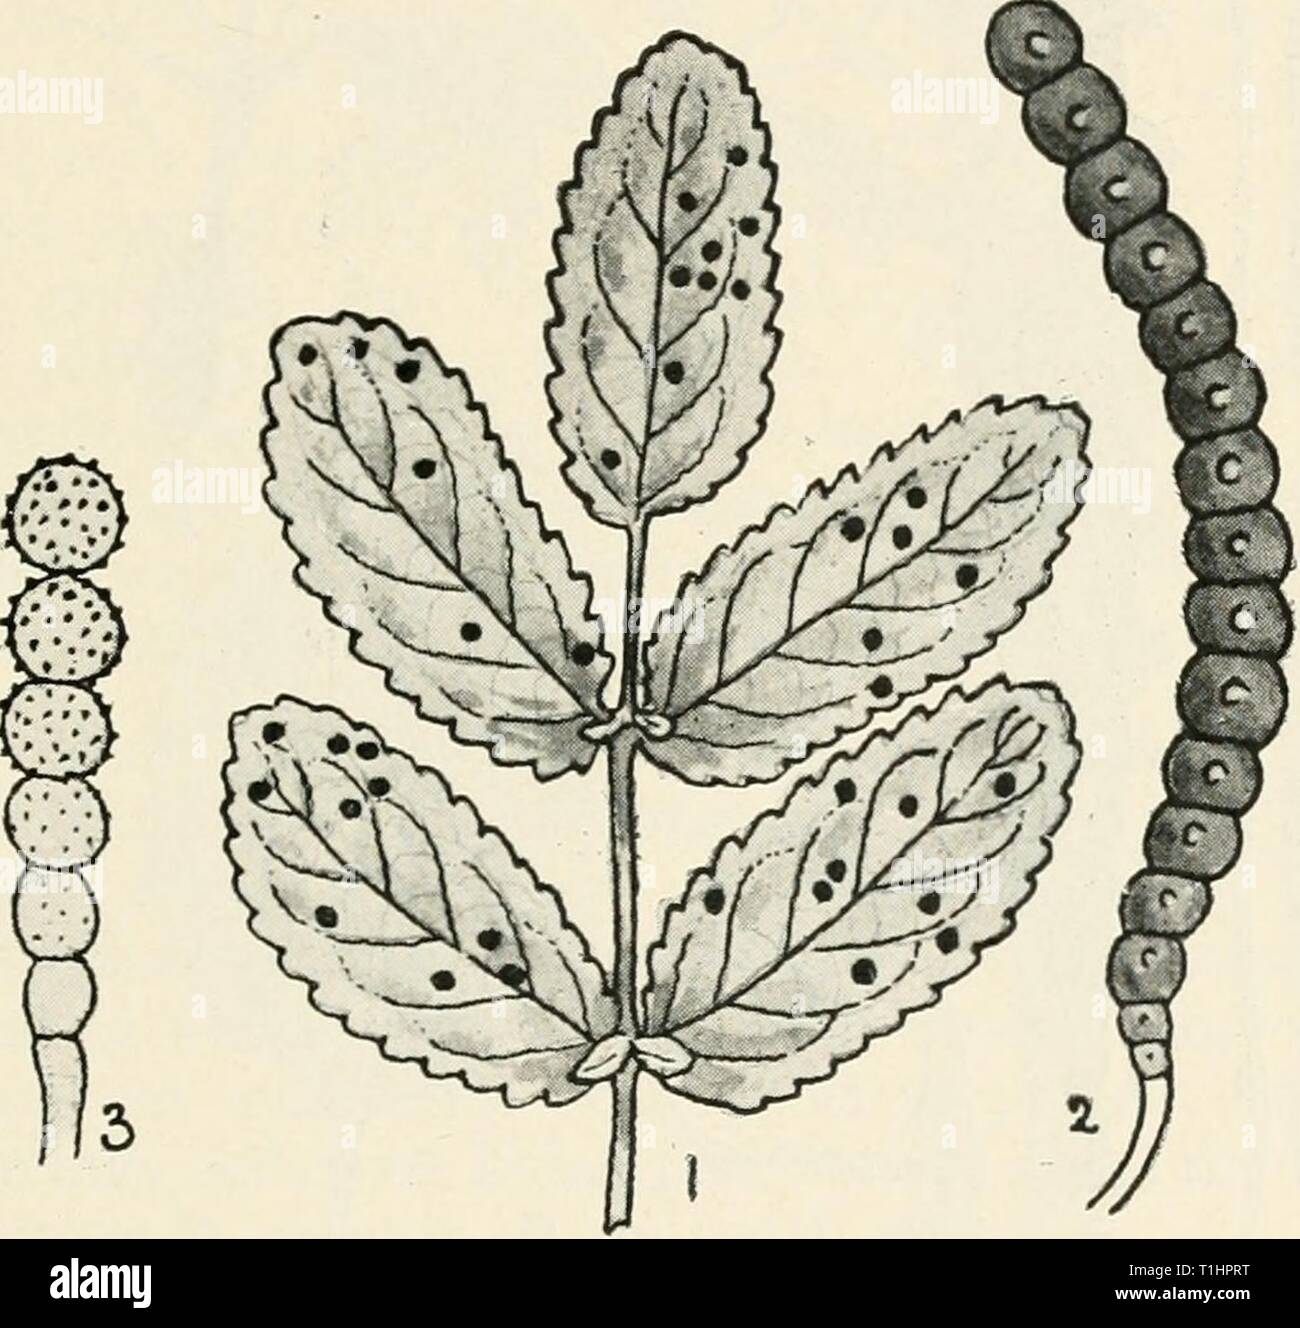 Diseases of cultivated plants and Diseases of cultivated plants and trees  diseasesofcultiv00massuoft Year: [1910?]  GYMNOSPORANGIUM 315 chains. Closely allied to Phragmidhtm, differing mainly in the relatively greater number of cells forming the teleuto- spore. Both stages grow on the same host-plant. Burnet leaf spot {Xenodochus carbonarius, Schlecht.) is parasitic on this plant. The aecidium stage forms large, orange-red, roundish patches on the leaves, and elongated patches on the stems. This is followed by the black, wart- like pustules of the teleutospore stage on the leaves. Only met wi Stock Photo